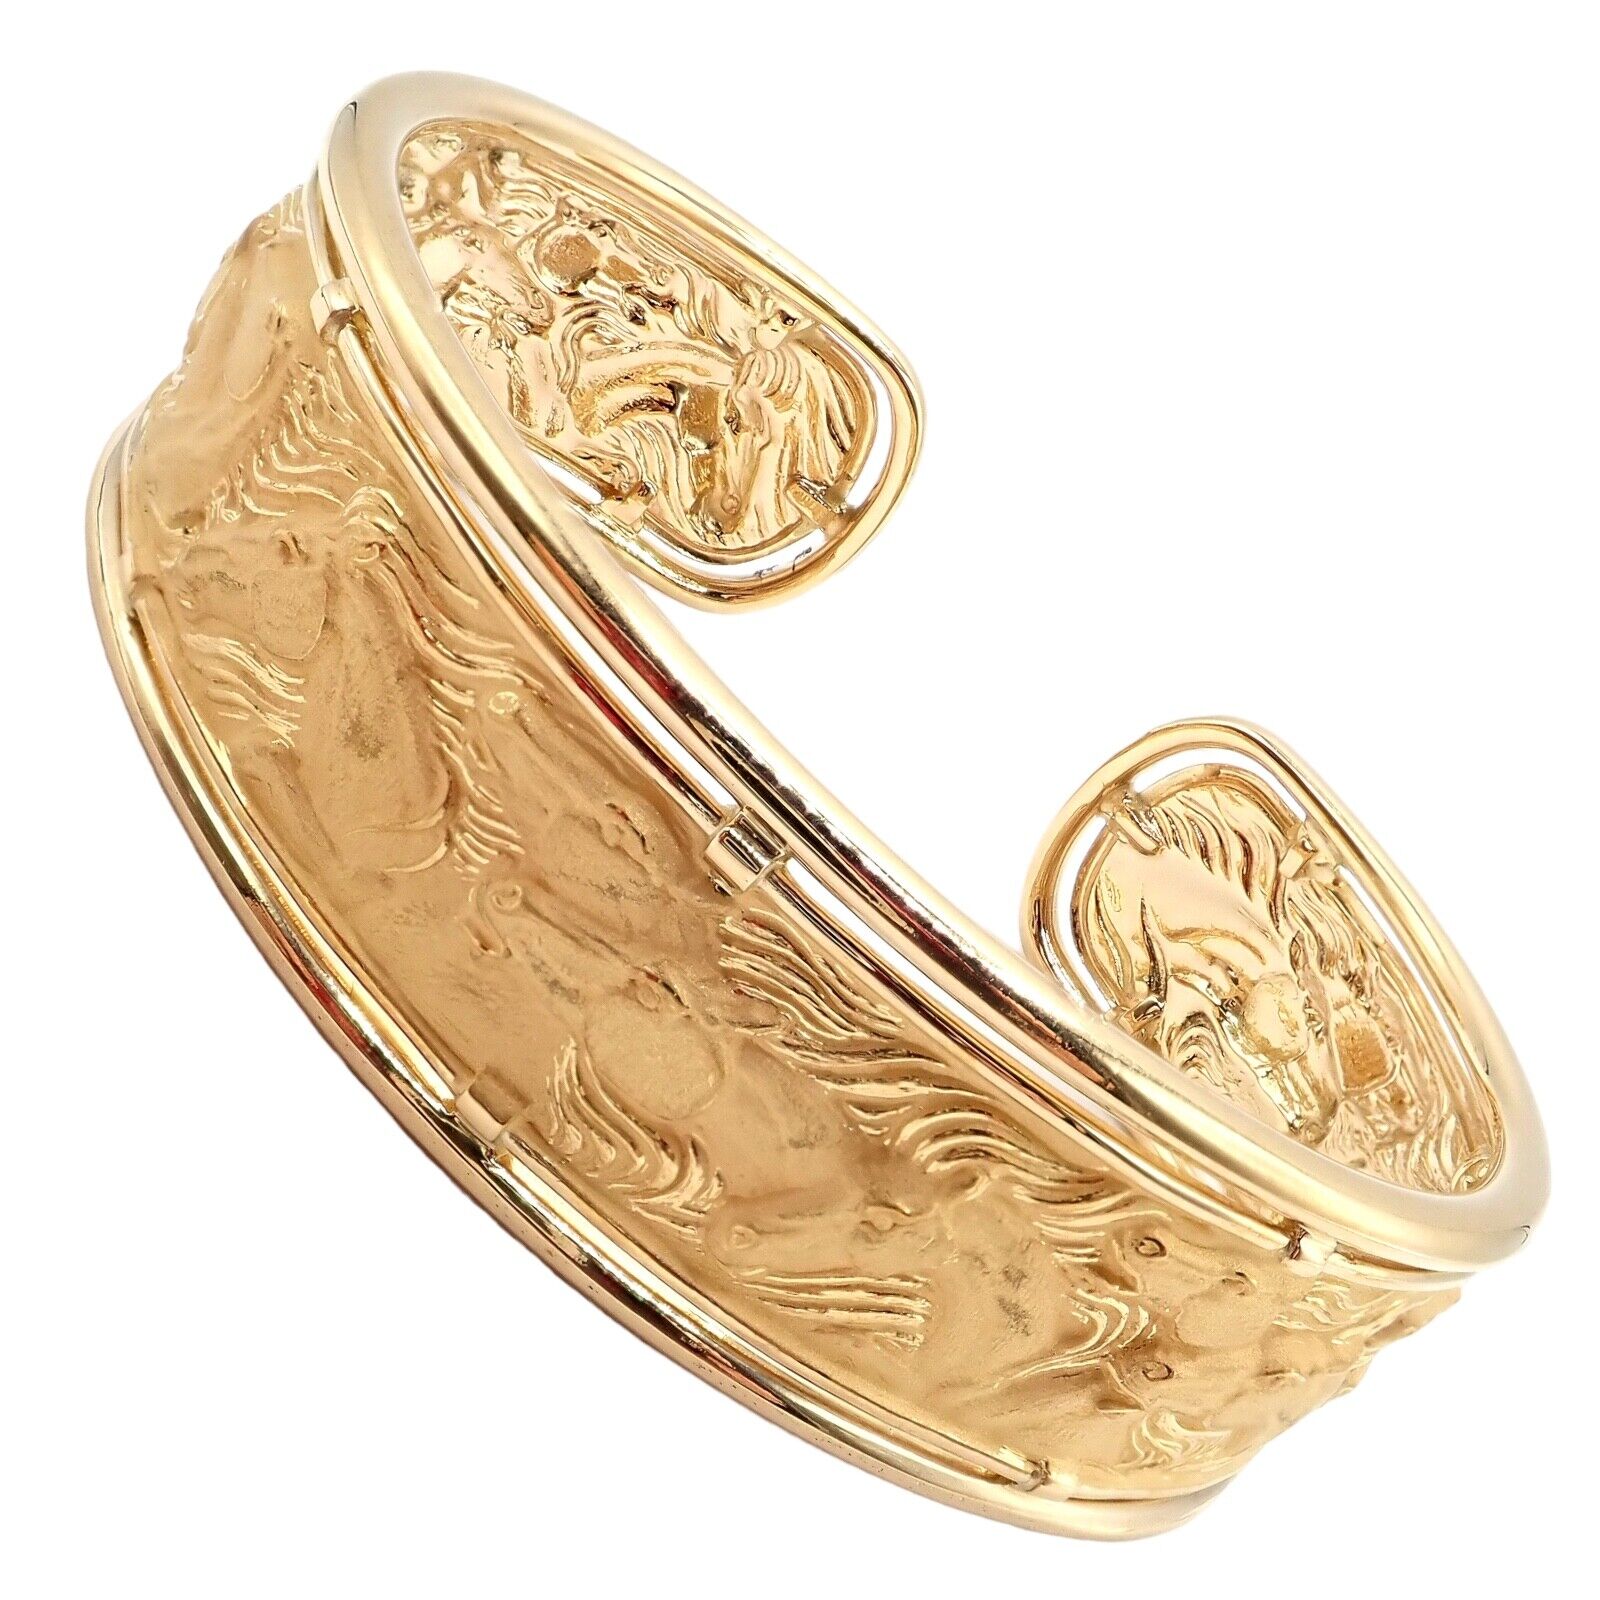 Carrera y Carrera Jewelry & Watches:Fine Jewelry:Bracelets & Charms Authentic! Carrera Y Carrera 18k Yellow Gold Equine Horse Stampede Cuff Bracelet